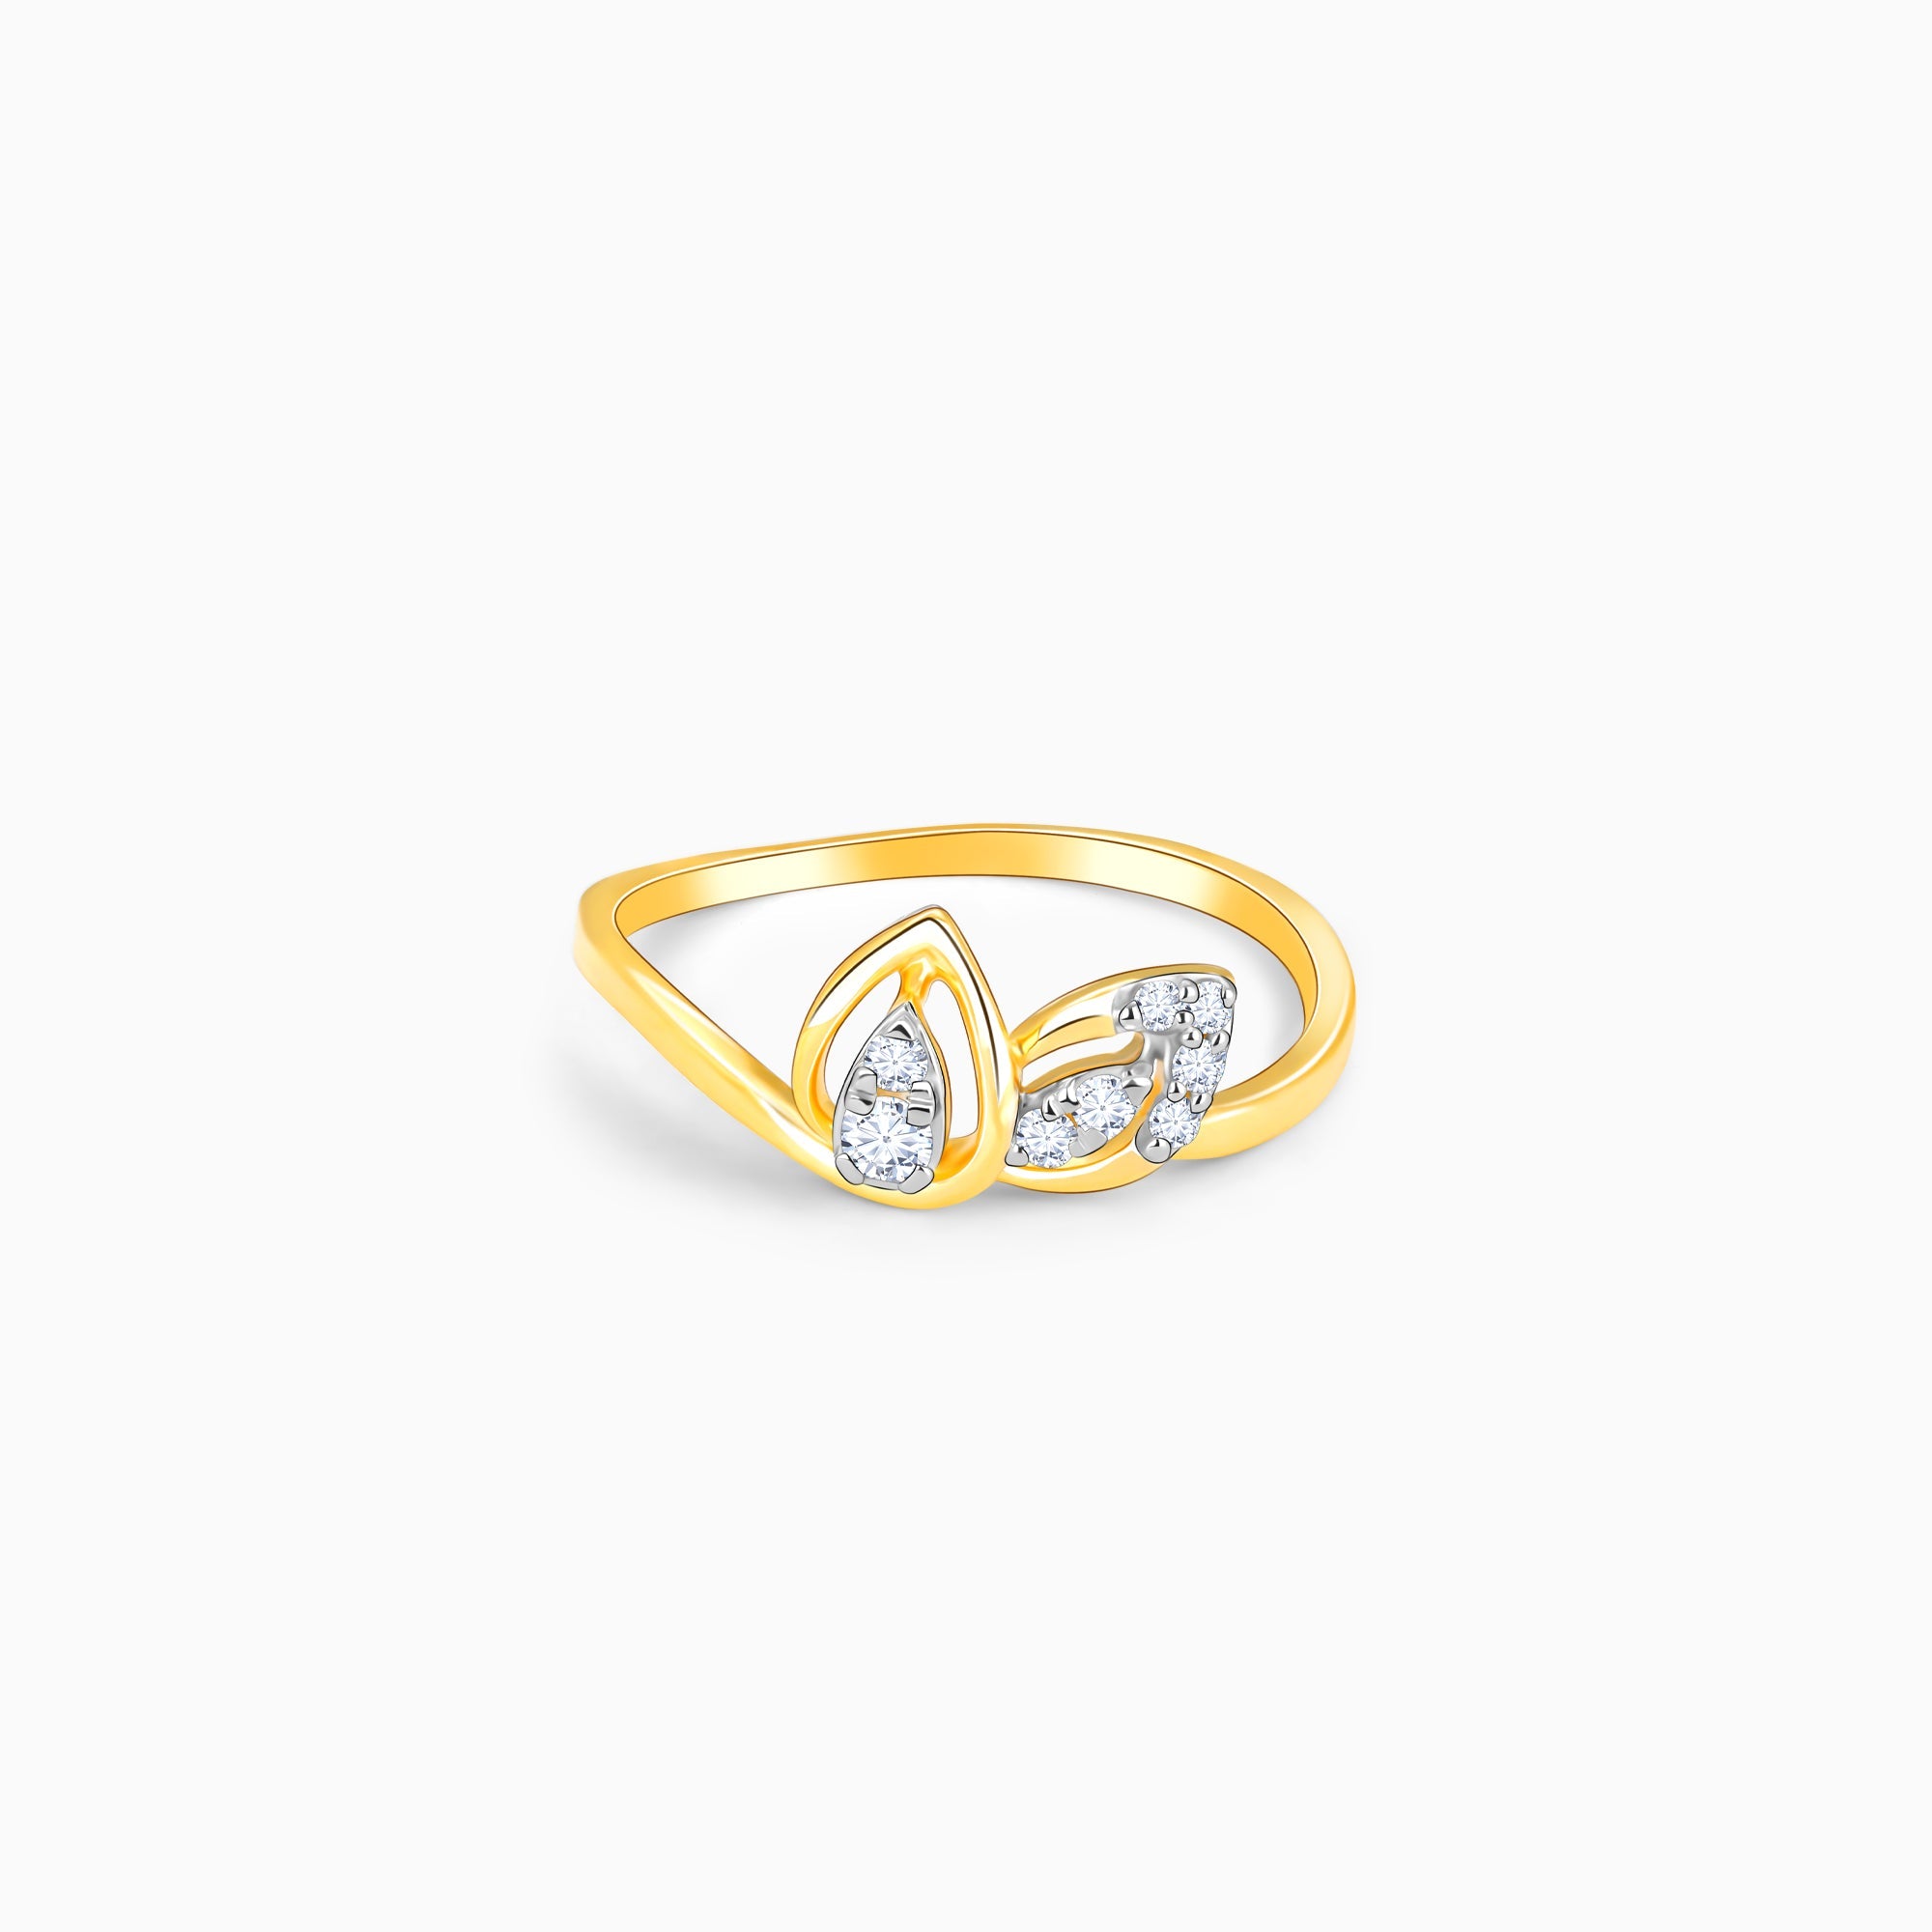 Buy Rings for Kids Designs Online in India | Candere by Kalyan Jewellers